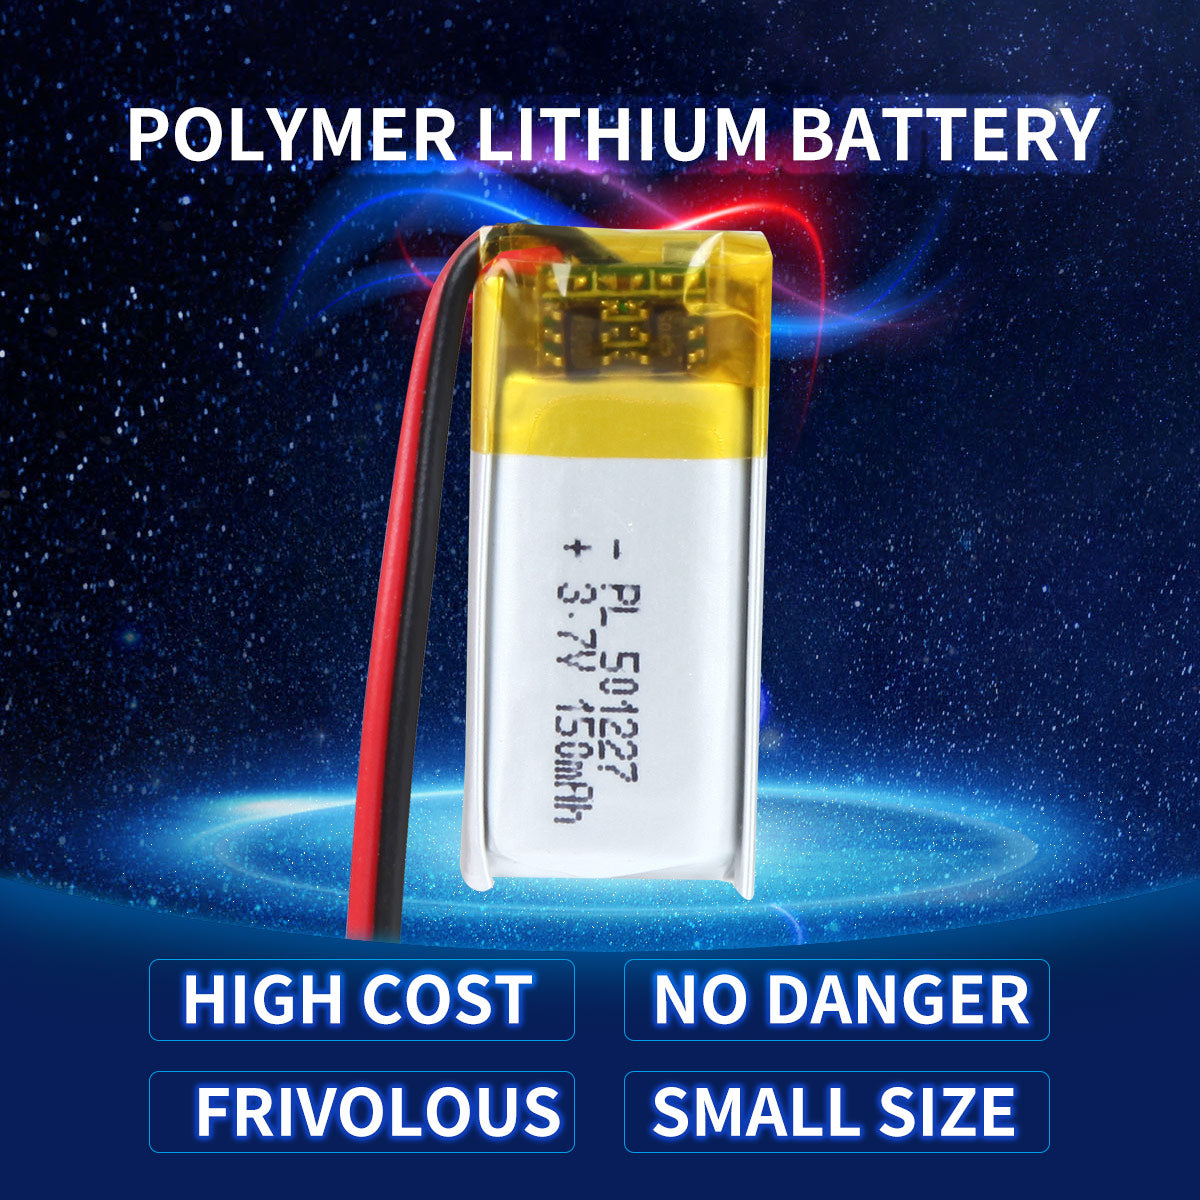 YDL 3.7V 150mAh 501227 Rechargeable Lipo Battery with JST Connector - YDL Battery